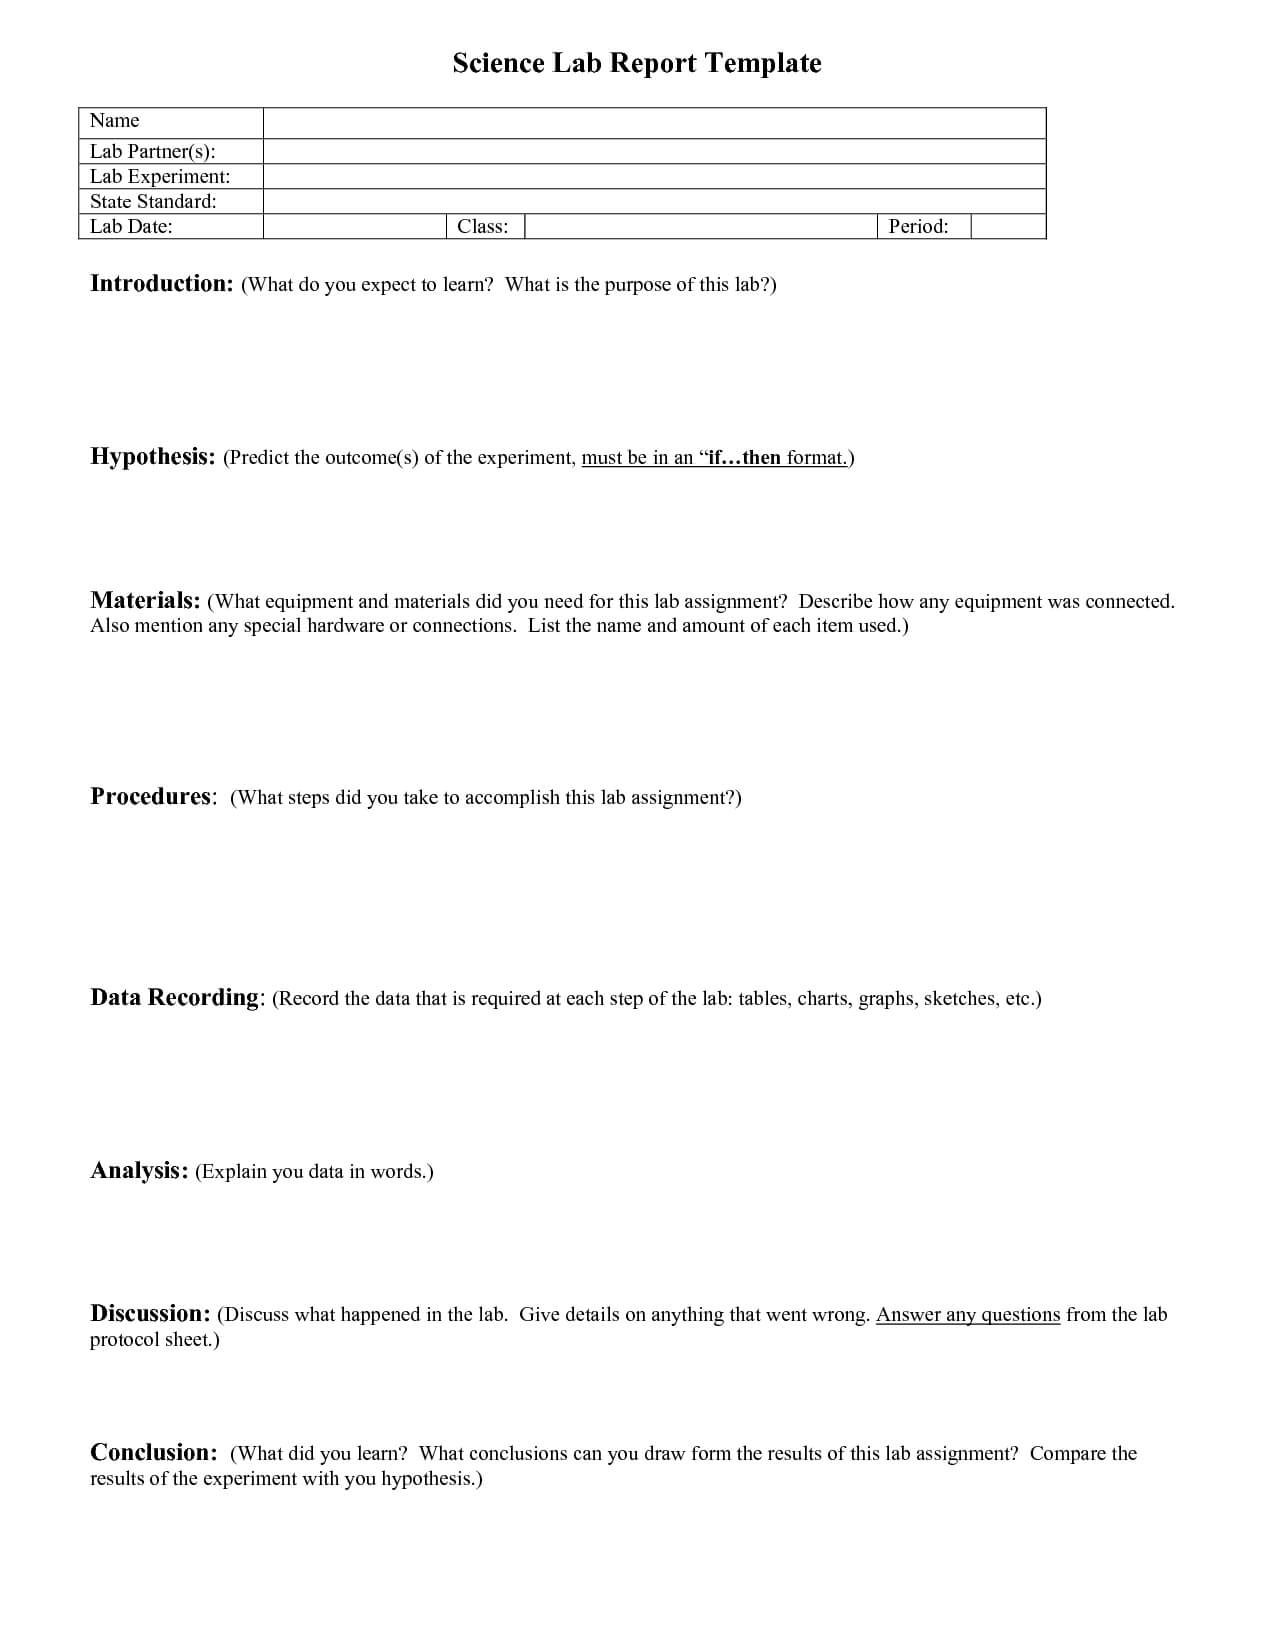 Science Report Outline -   Yahoo Image Search Results Throughout Science Lab Report Template